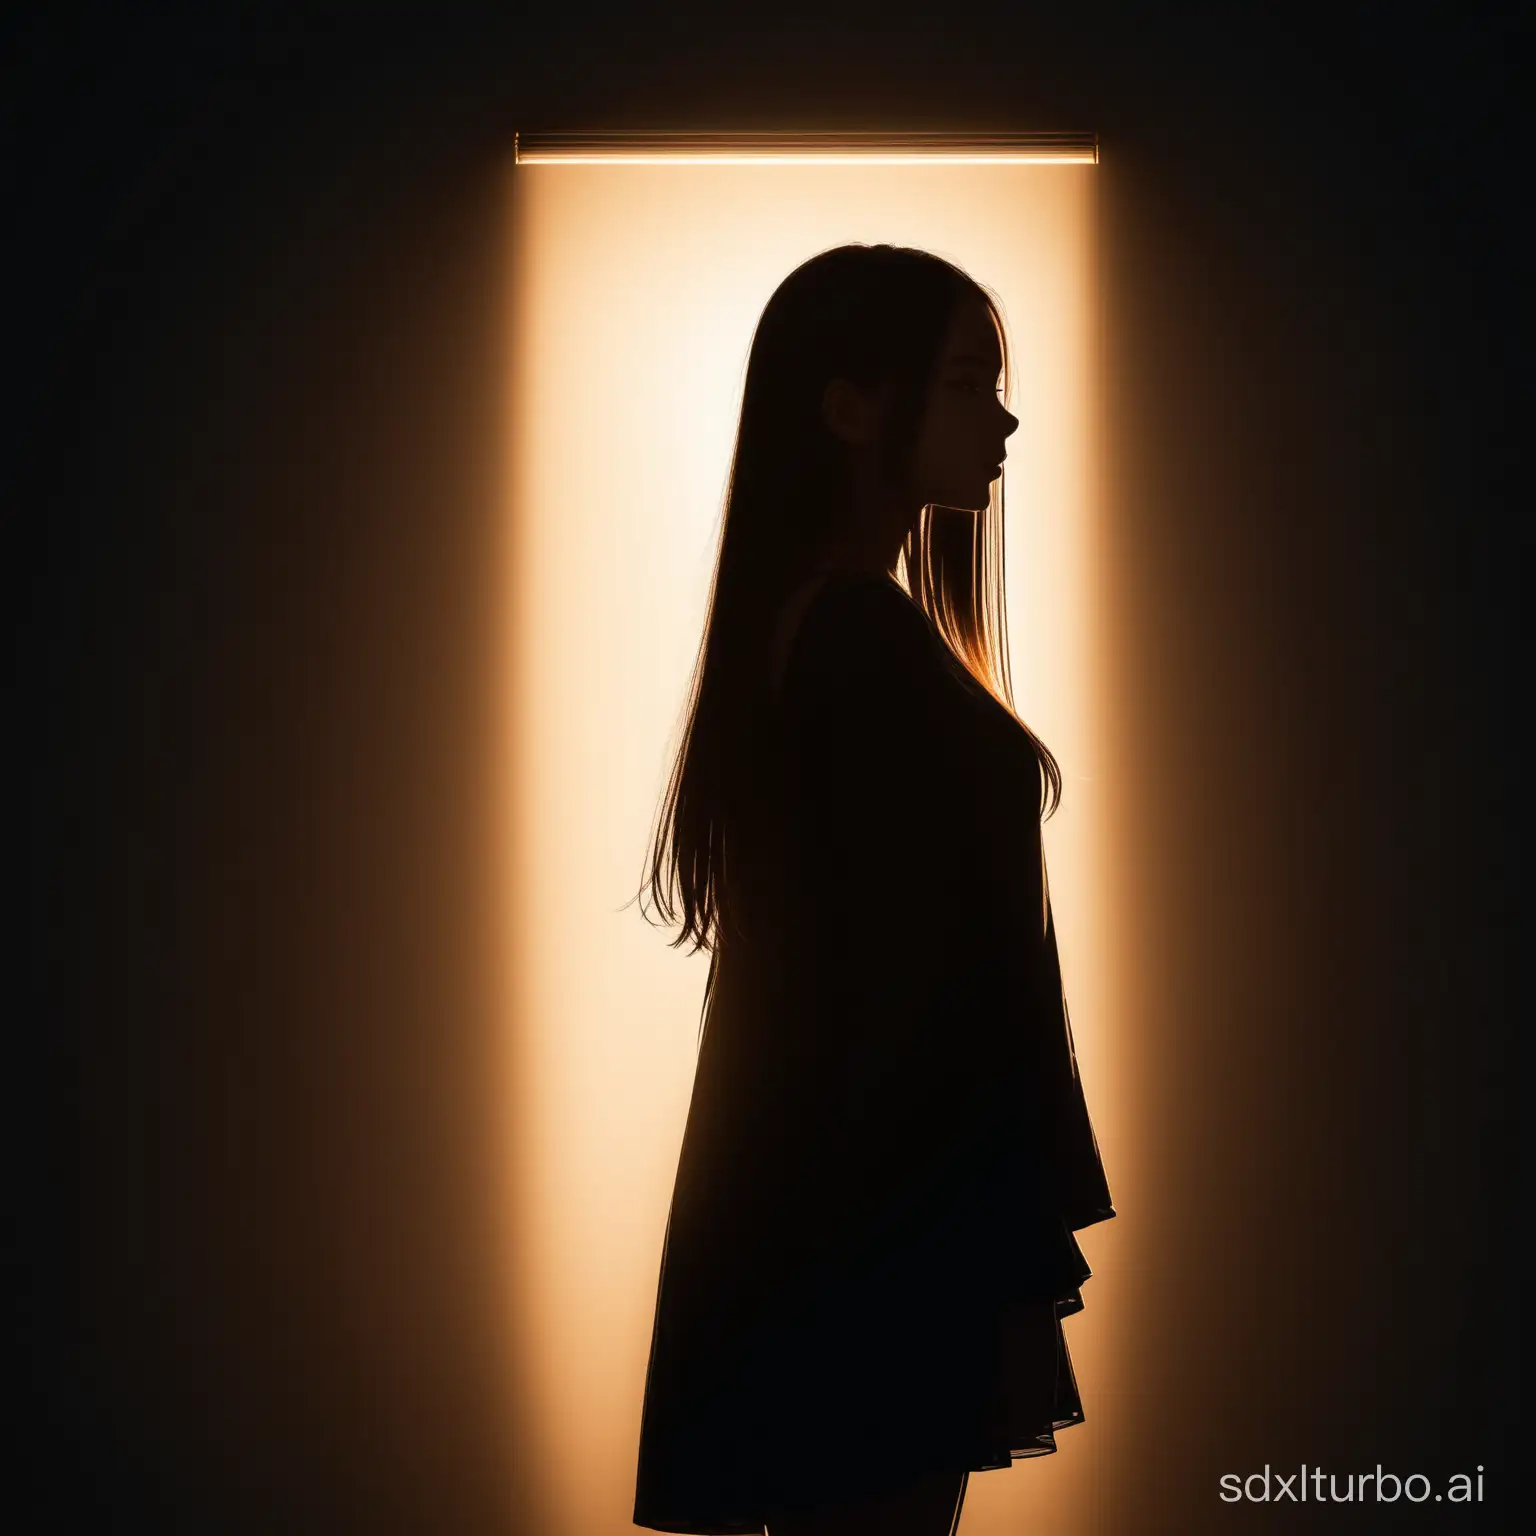 The girl with long hair standing in the backlight